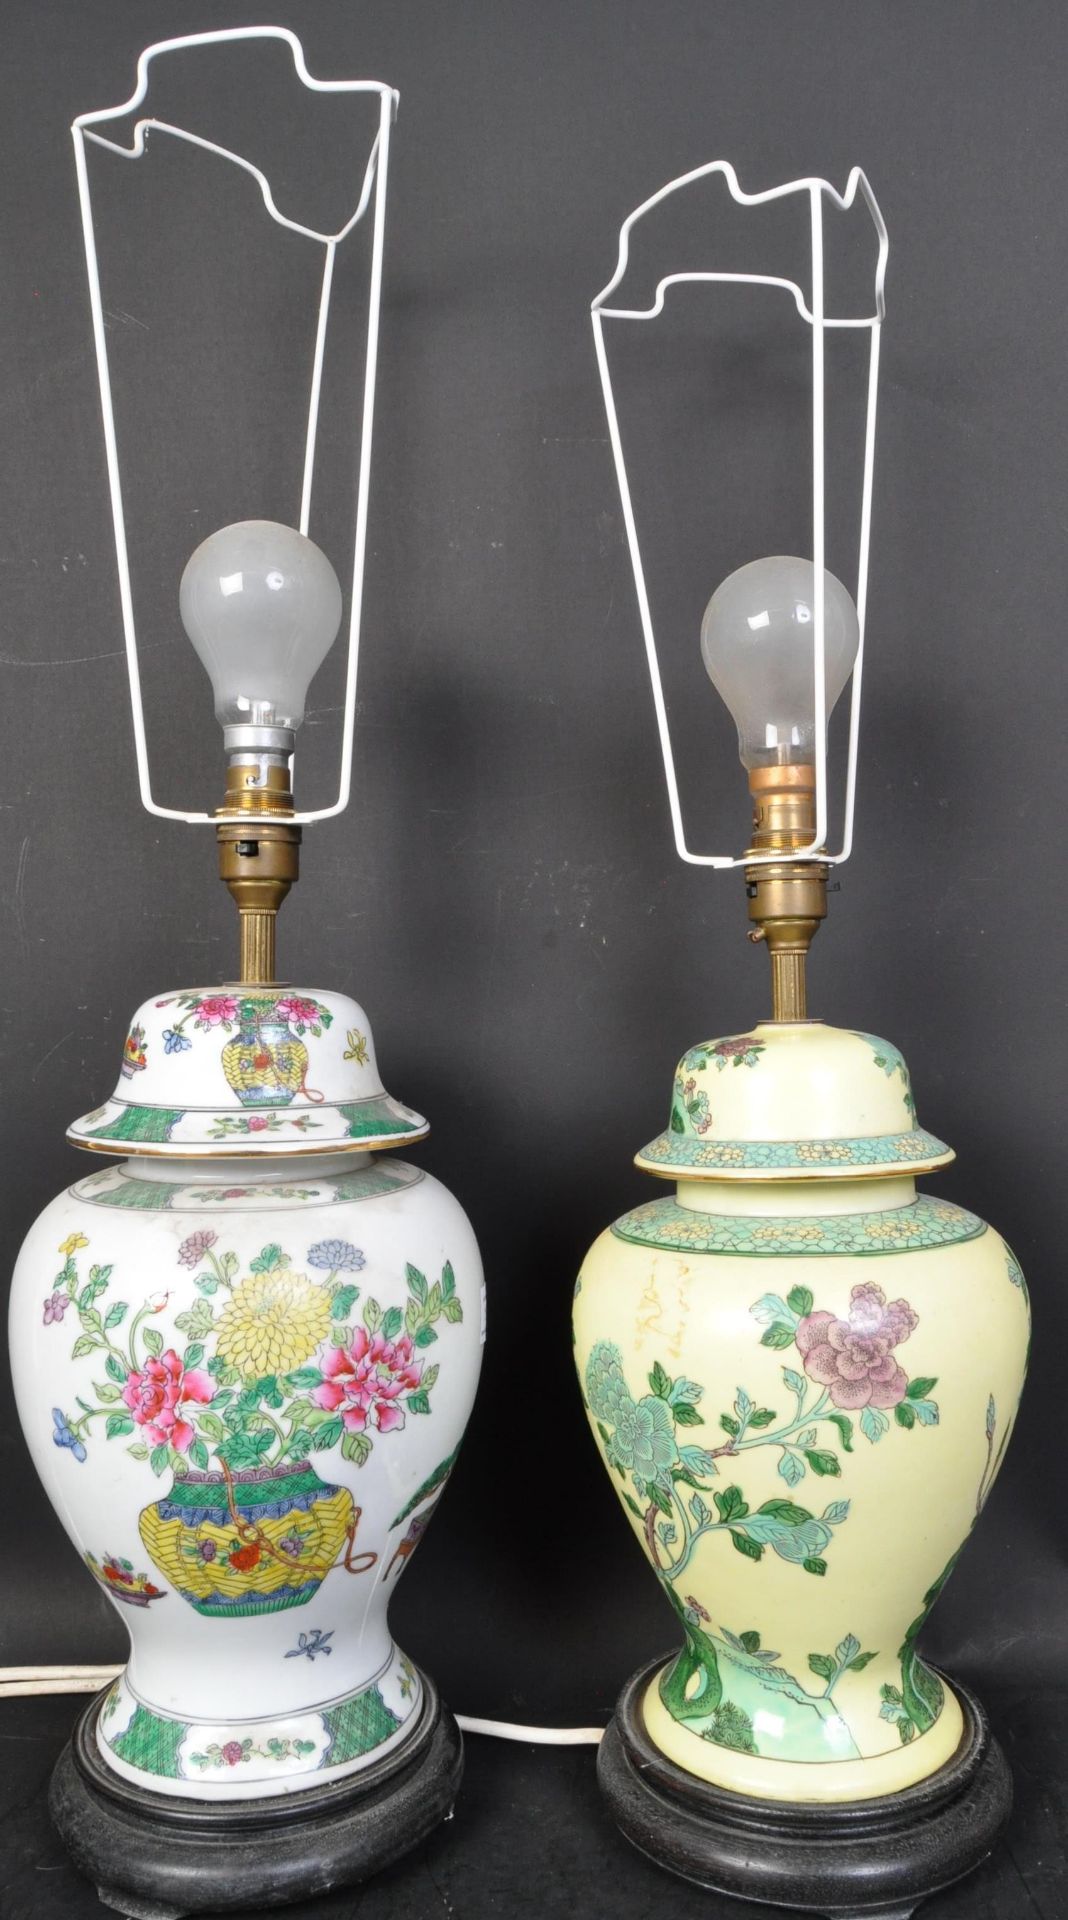 PAIR OF CHINESE FAMILLE ROSE PORCELAIN VASE LAMPS